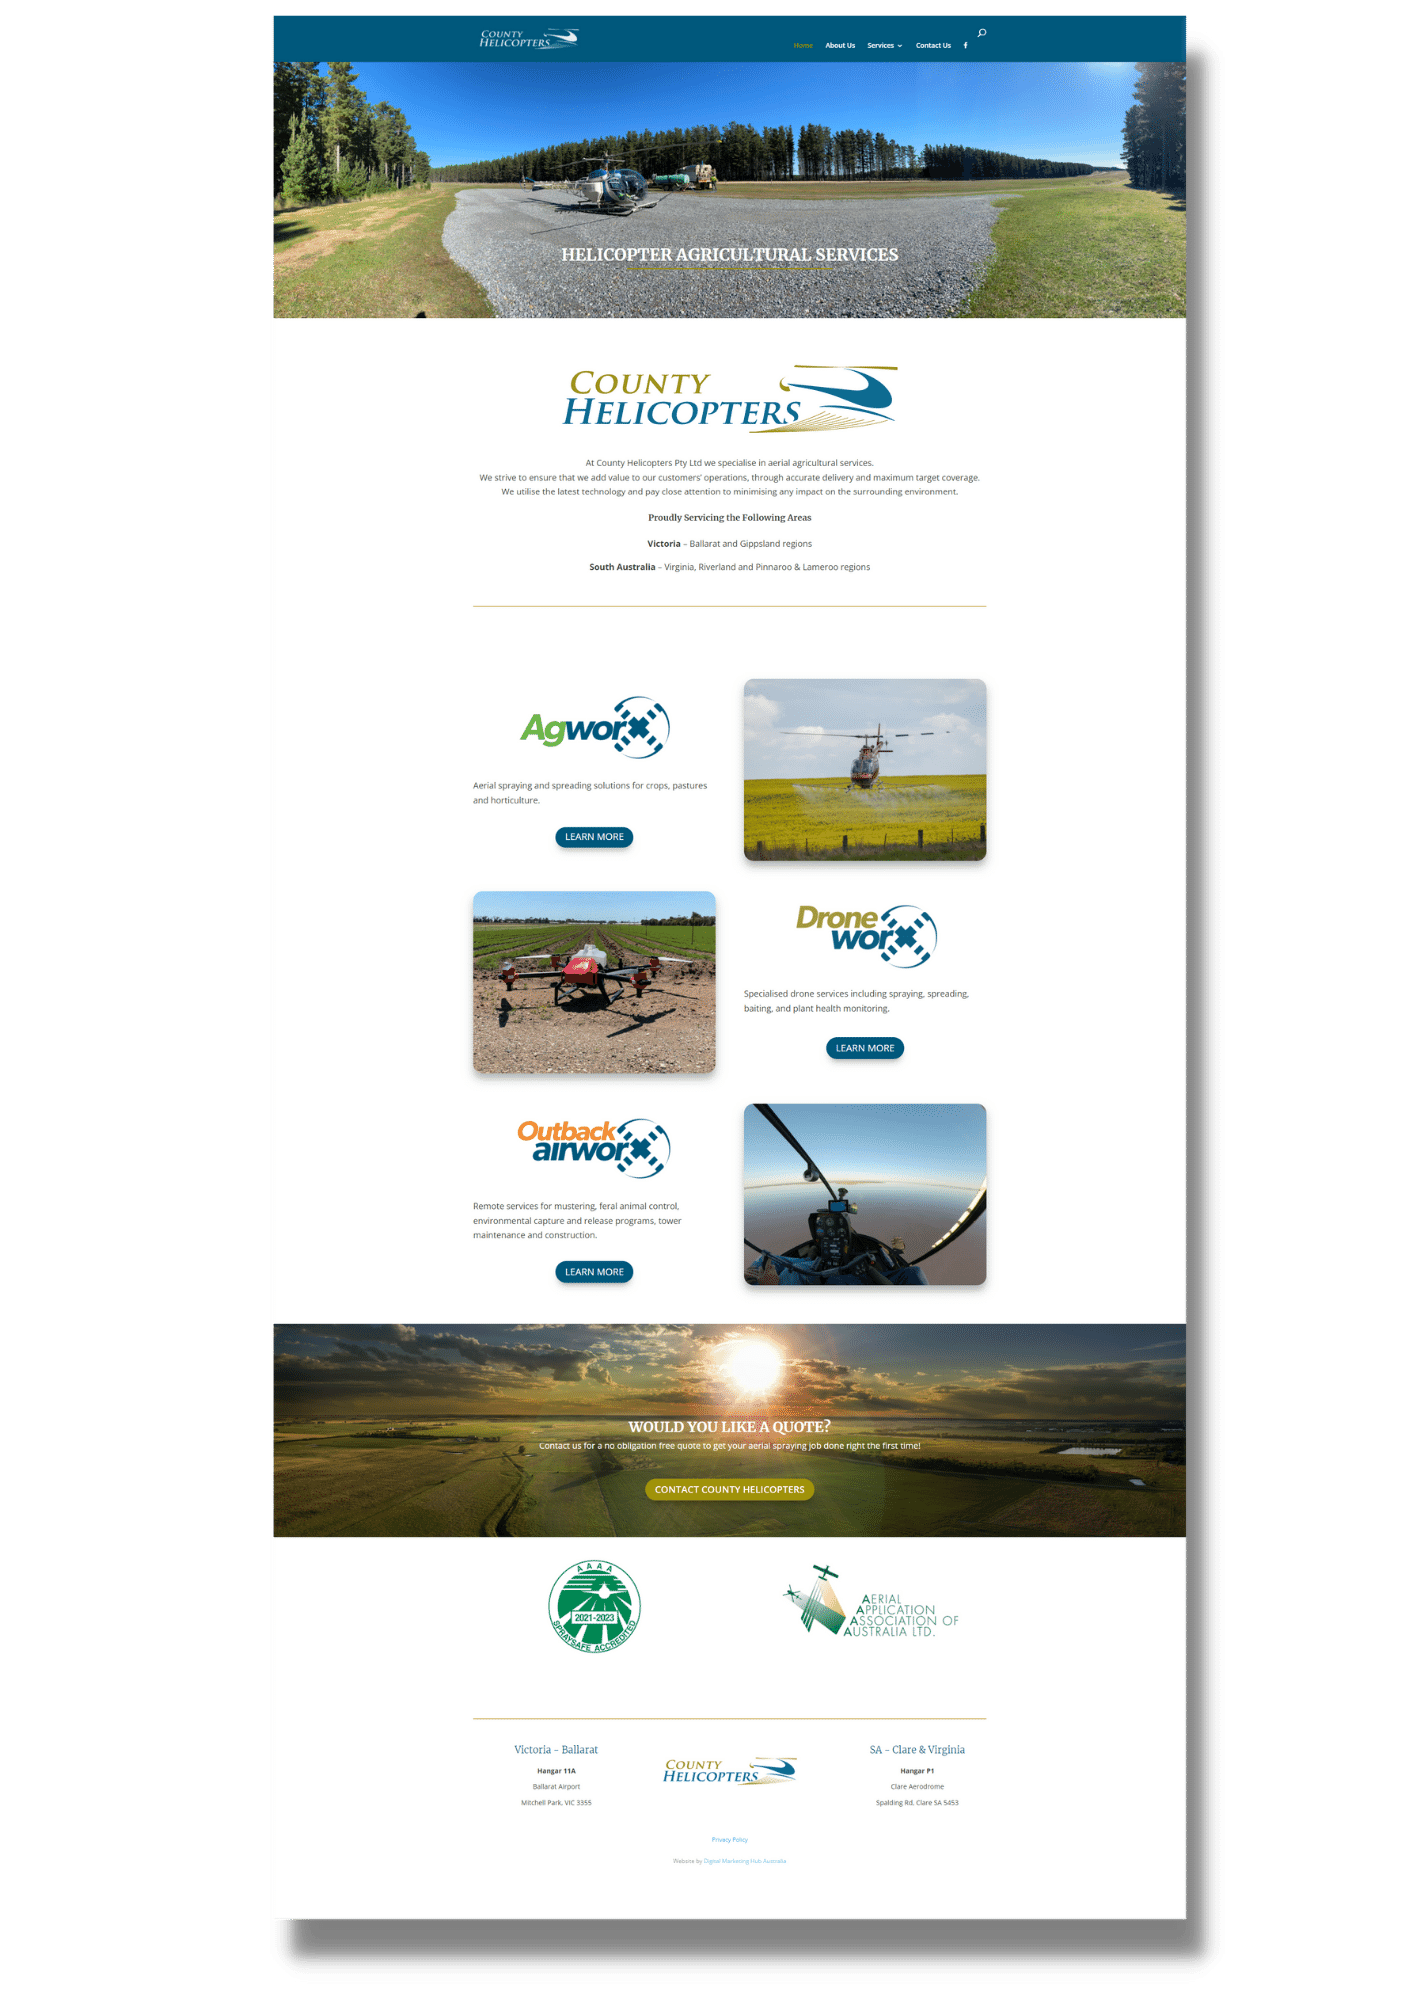 County Helicopters adelaide business website redesign 2